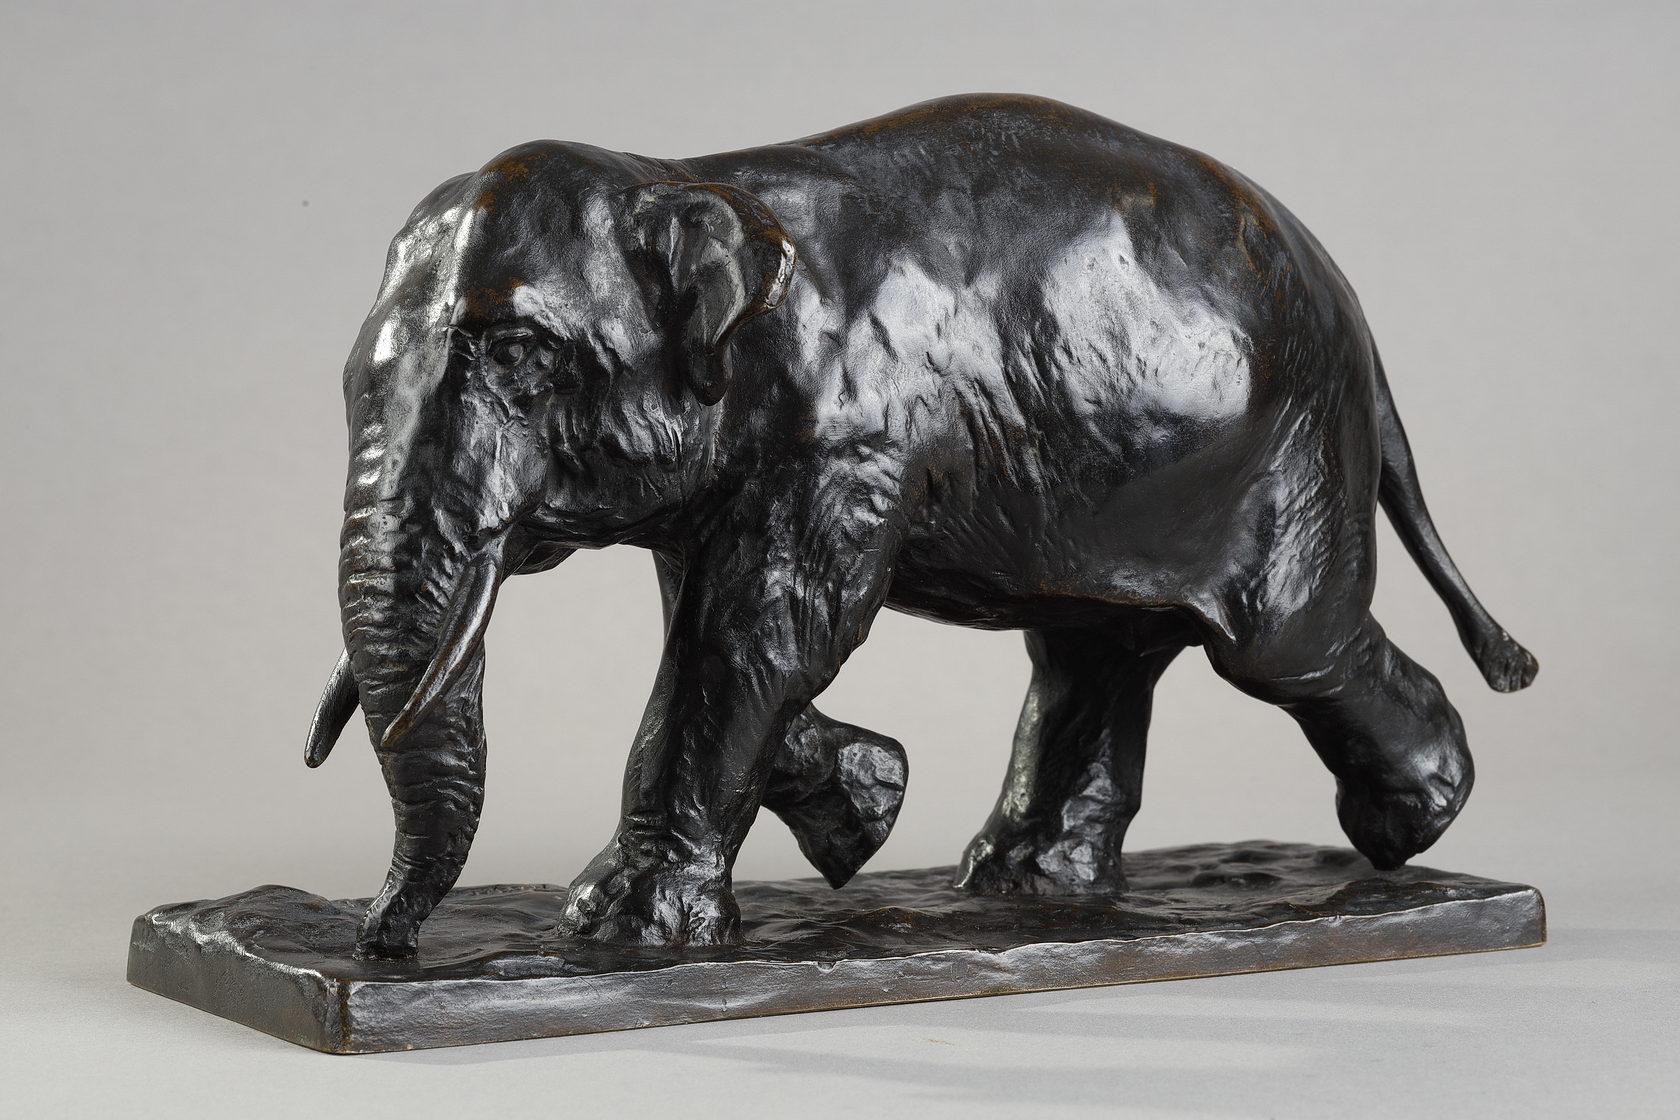 Elephant trotting
by Roger GODCHAUX (1878-1958)

Rare sculpture in bronze with a nuanced dark brown patina
Signed 